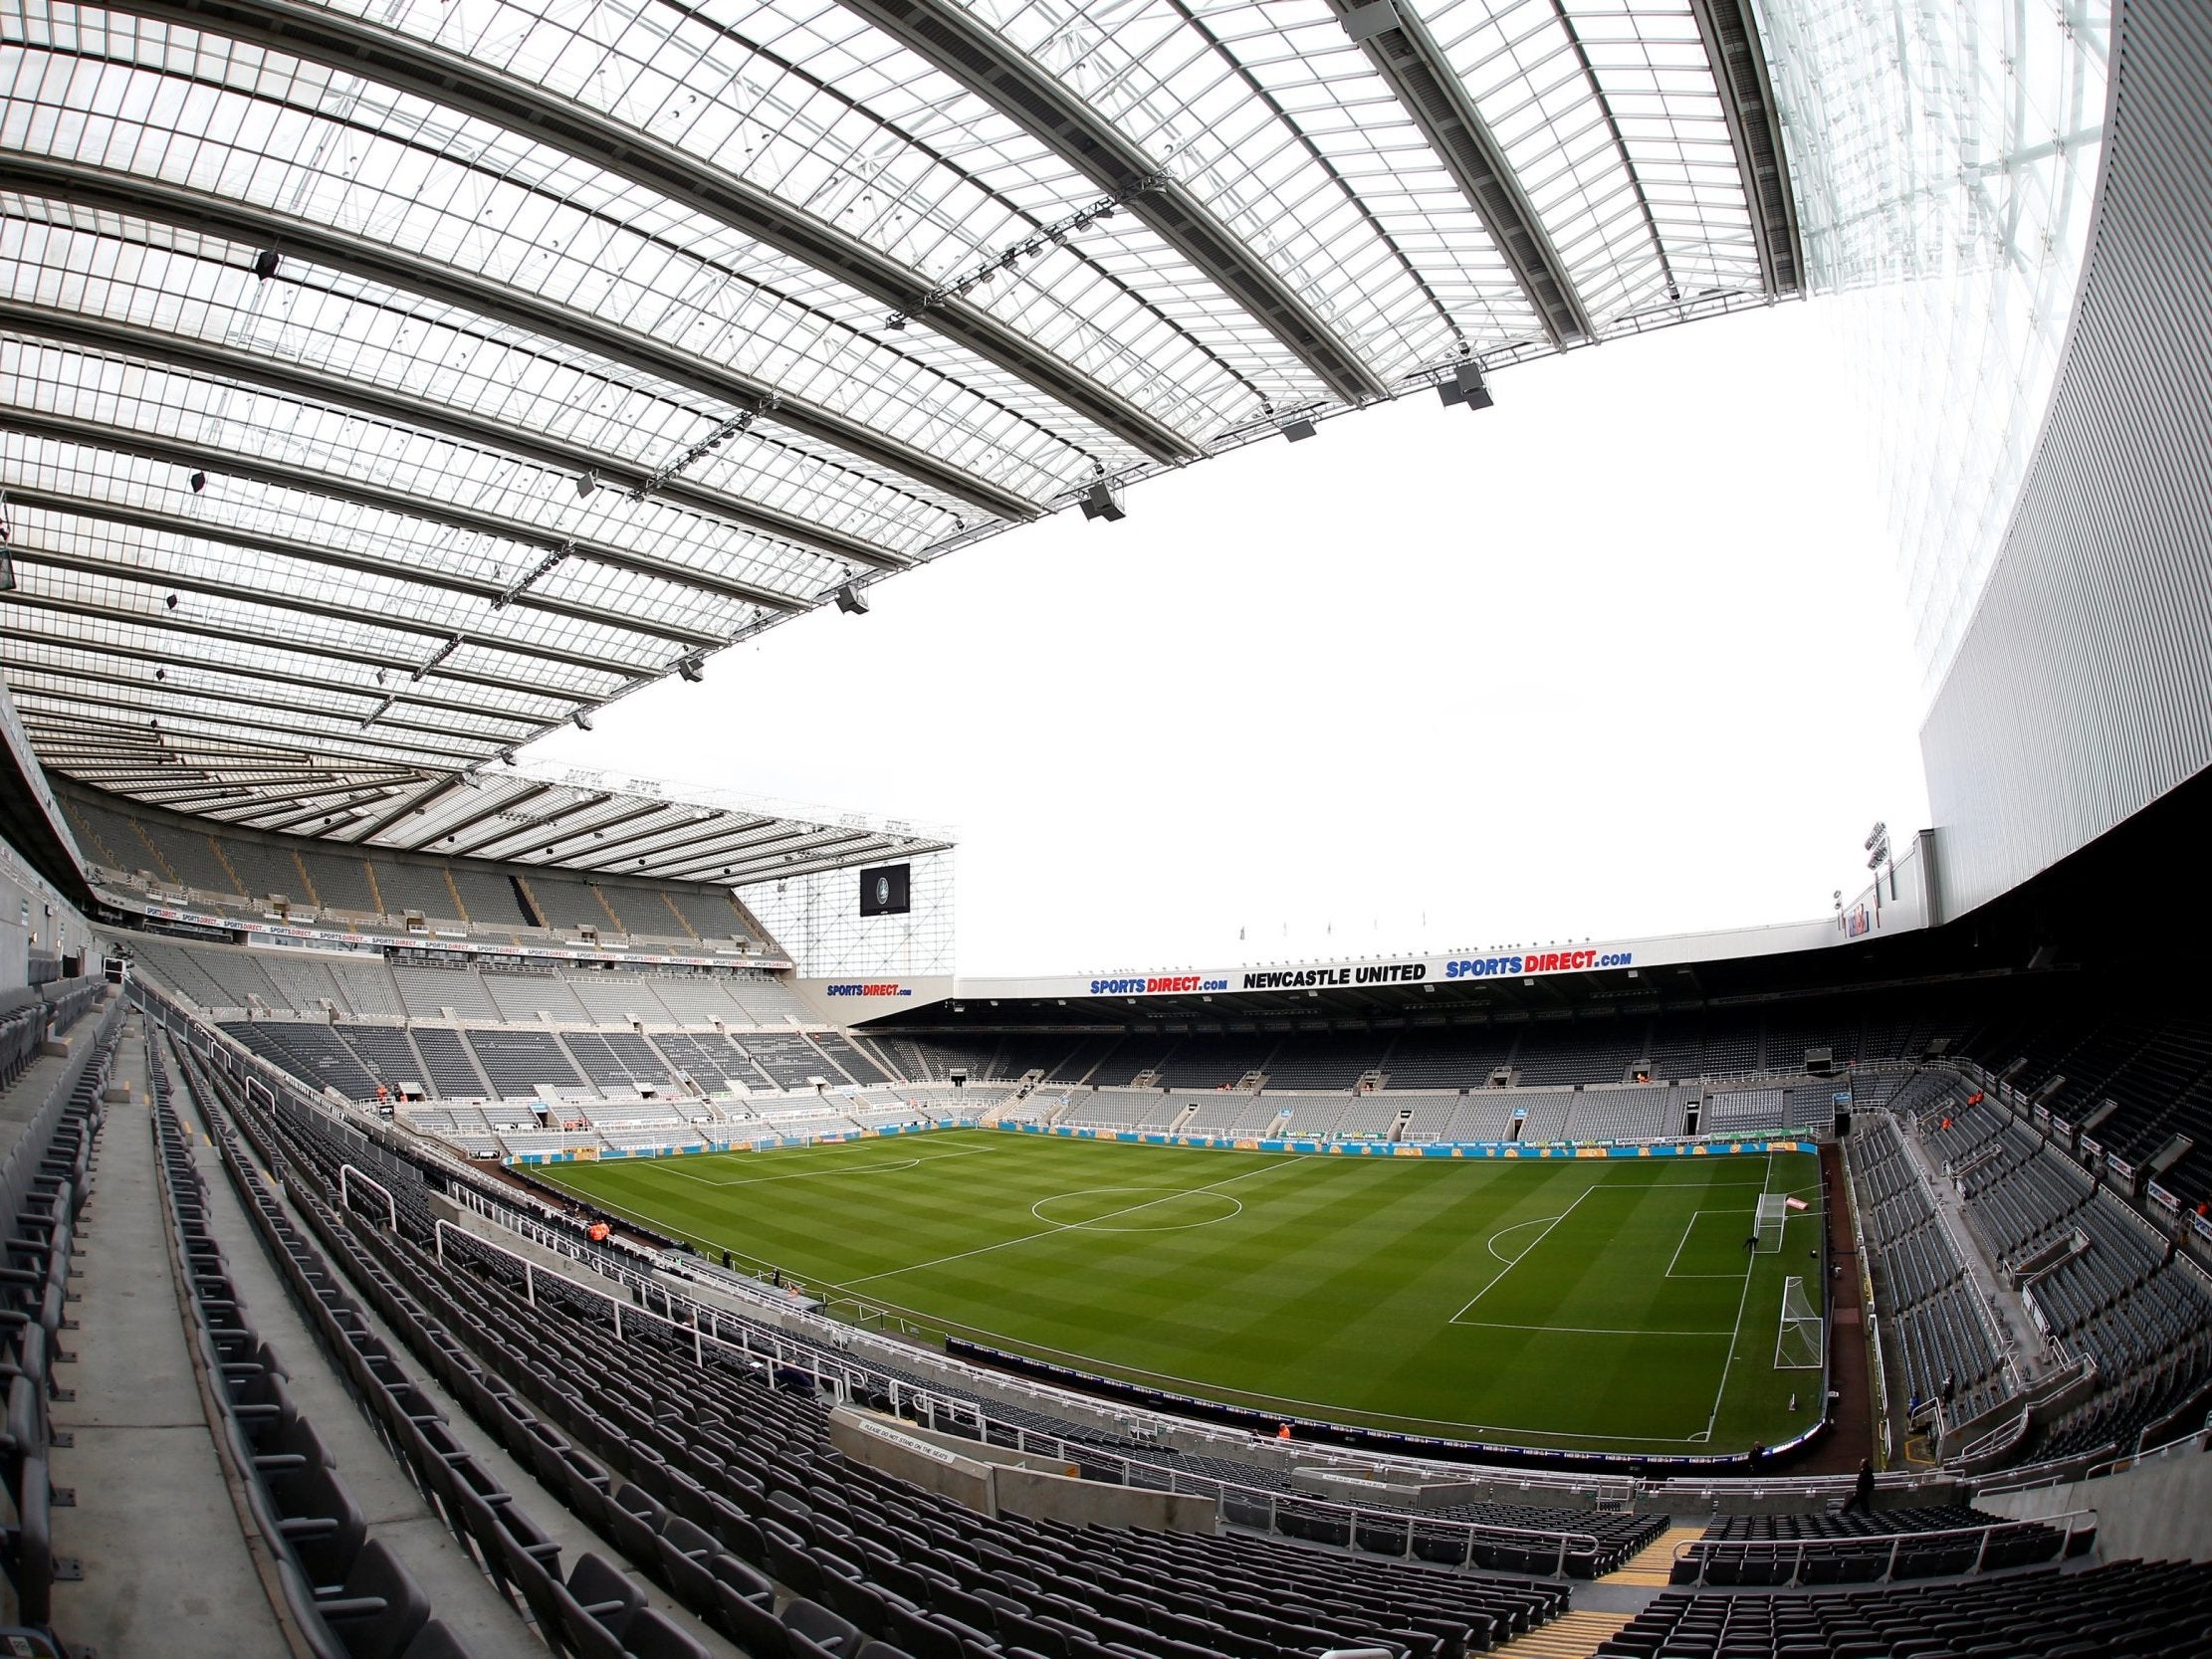 St James' Park will host the opening ceremony